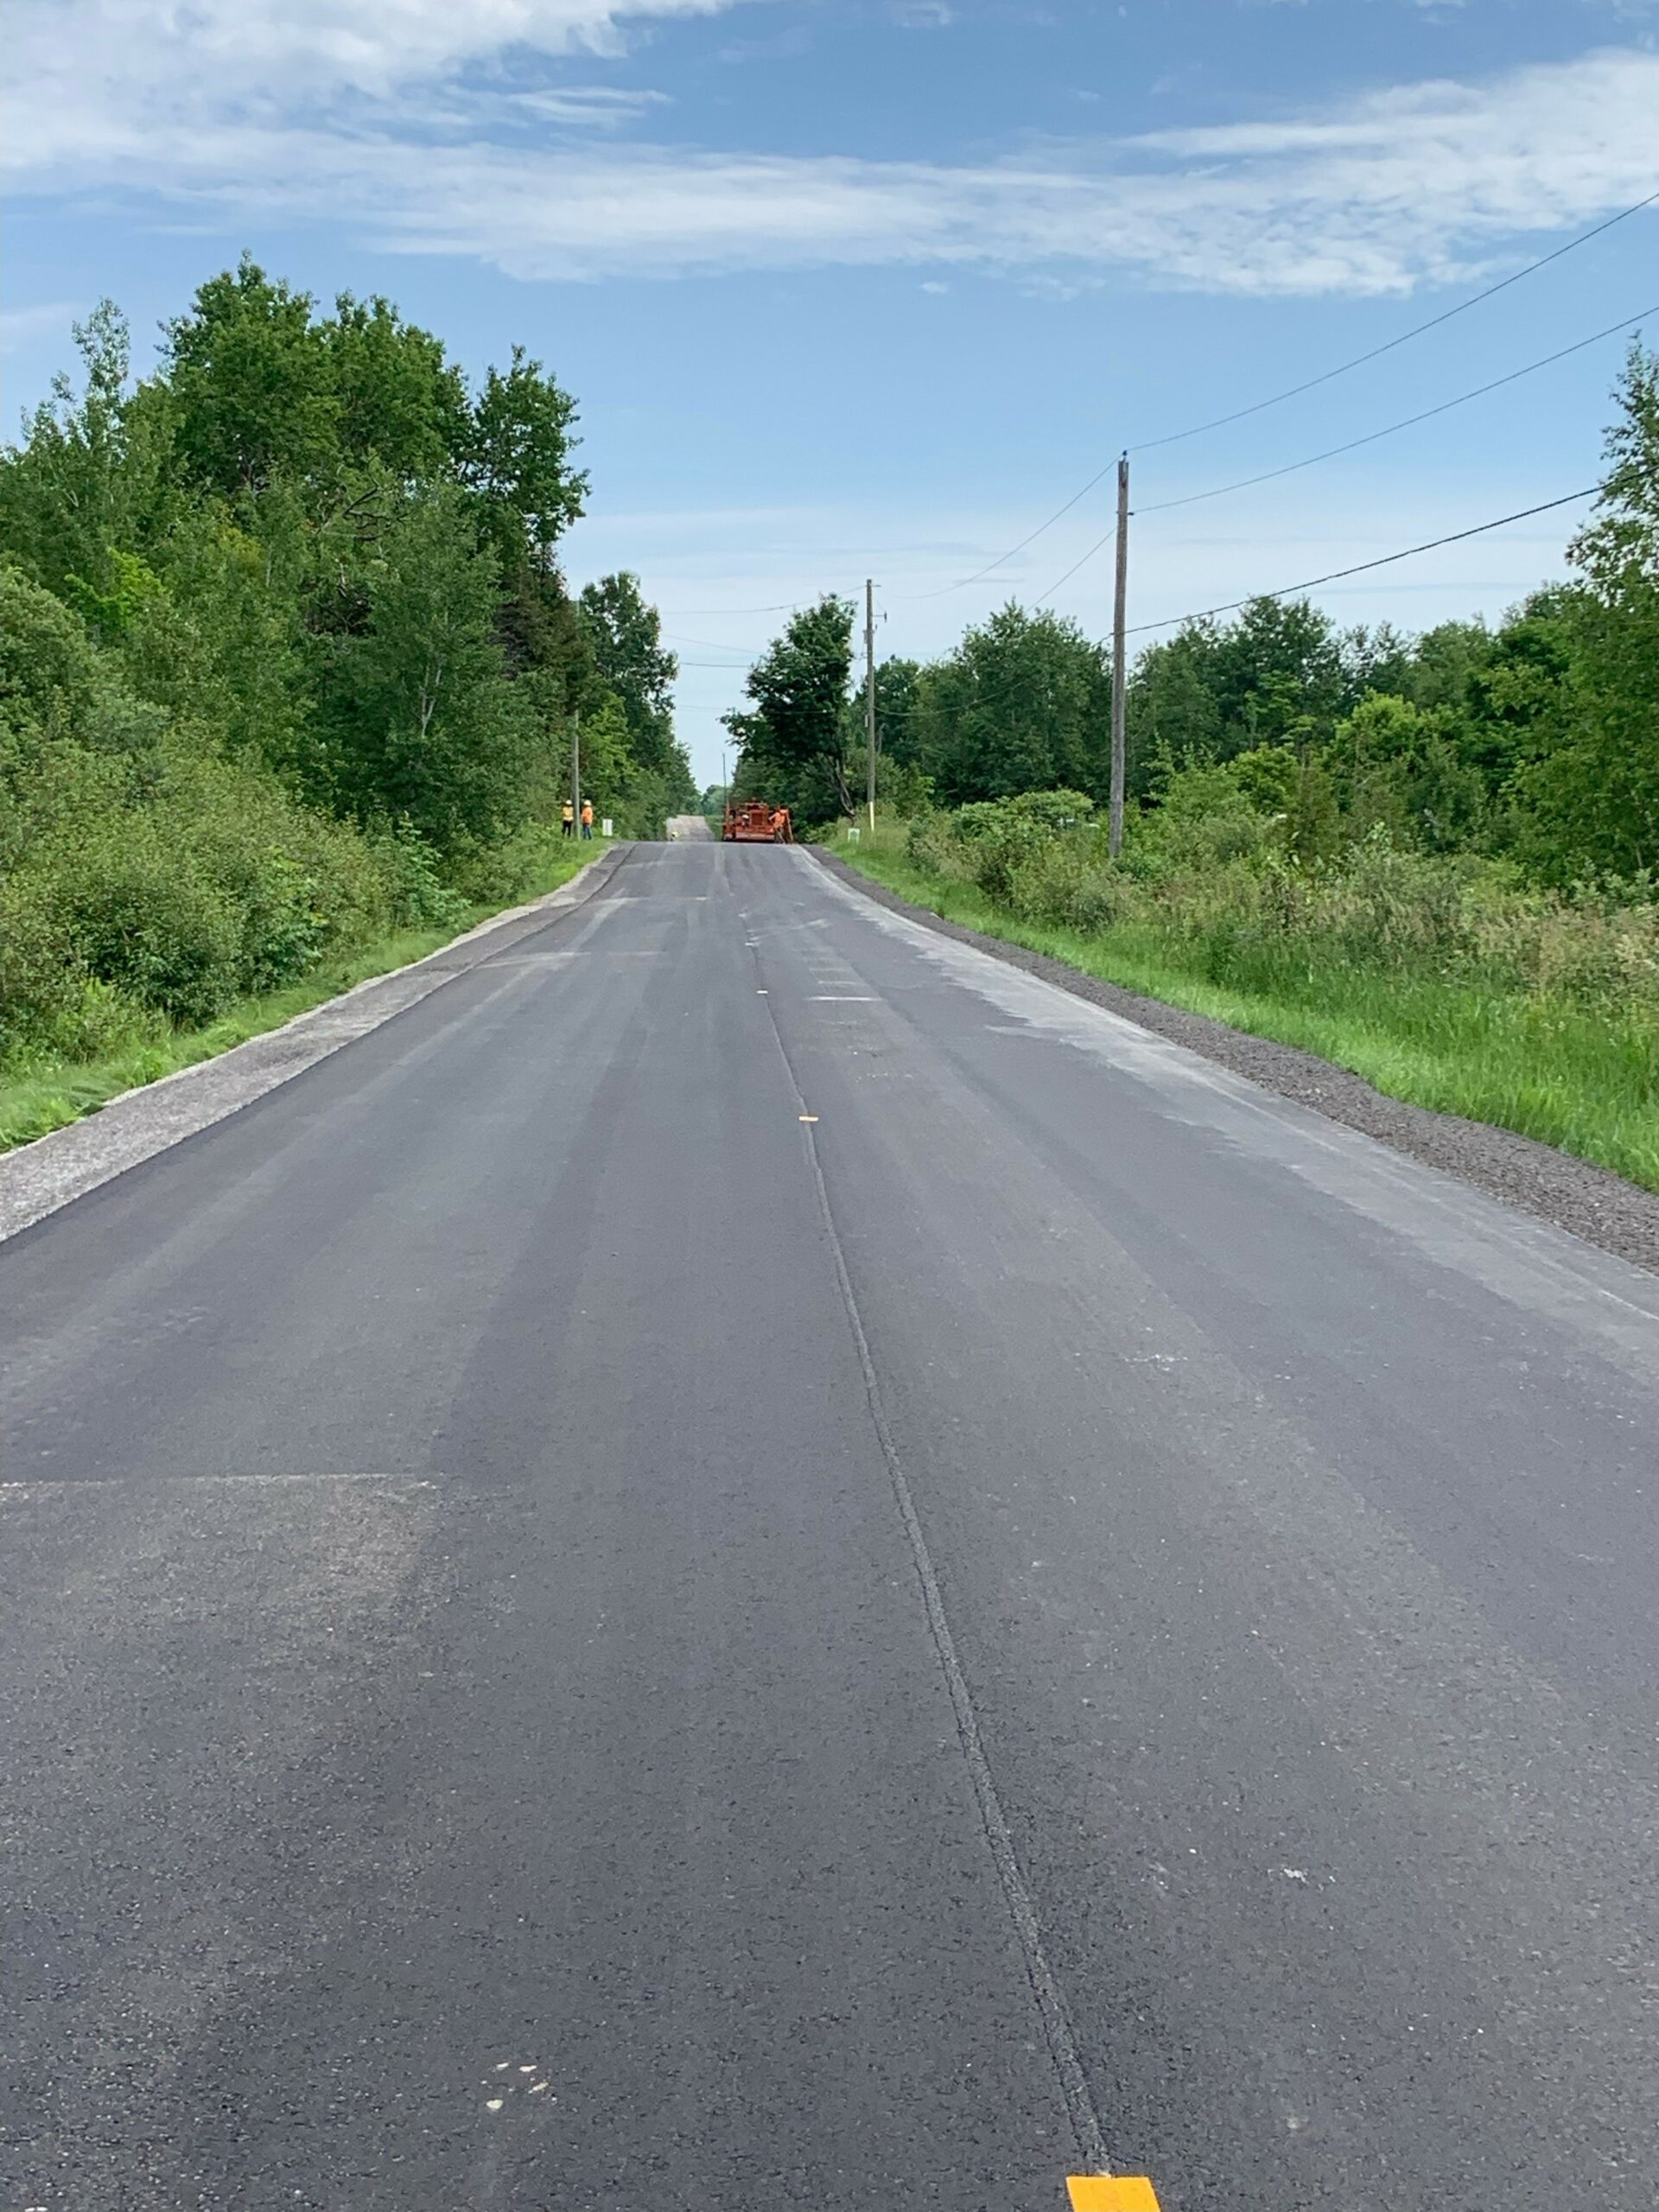 Coville Road, freshly paved